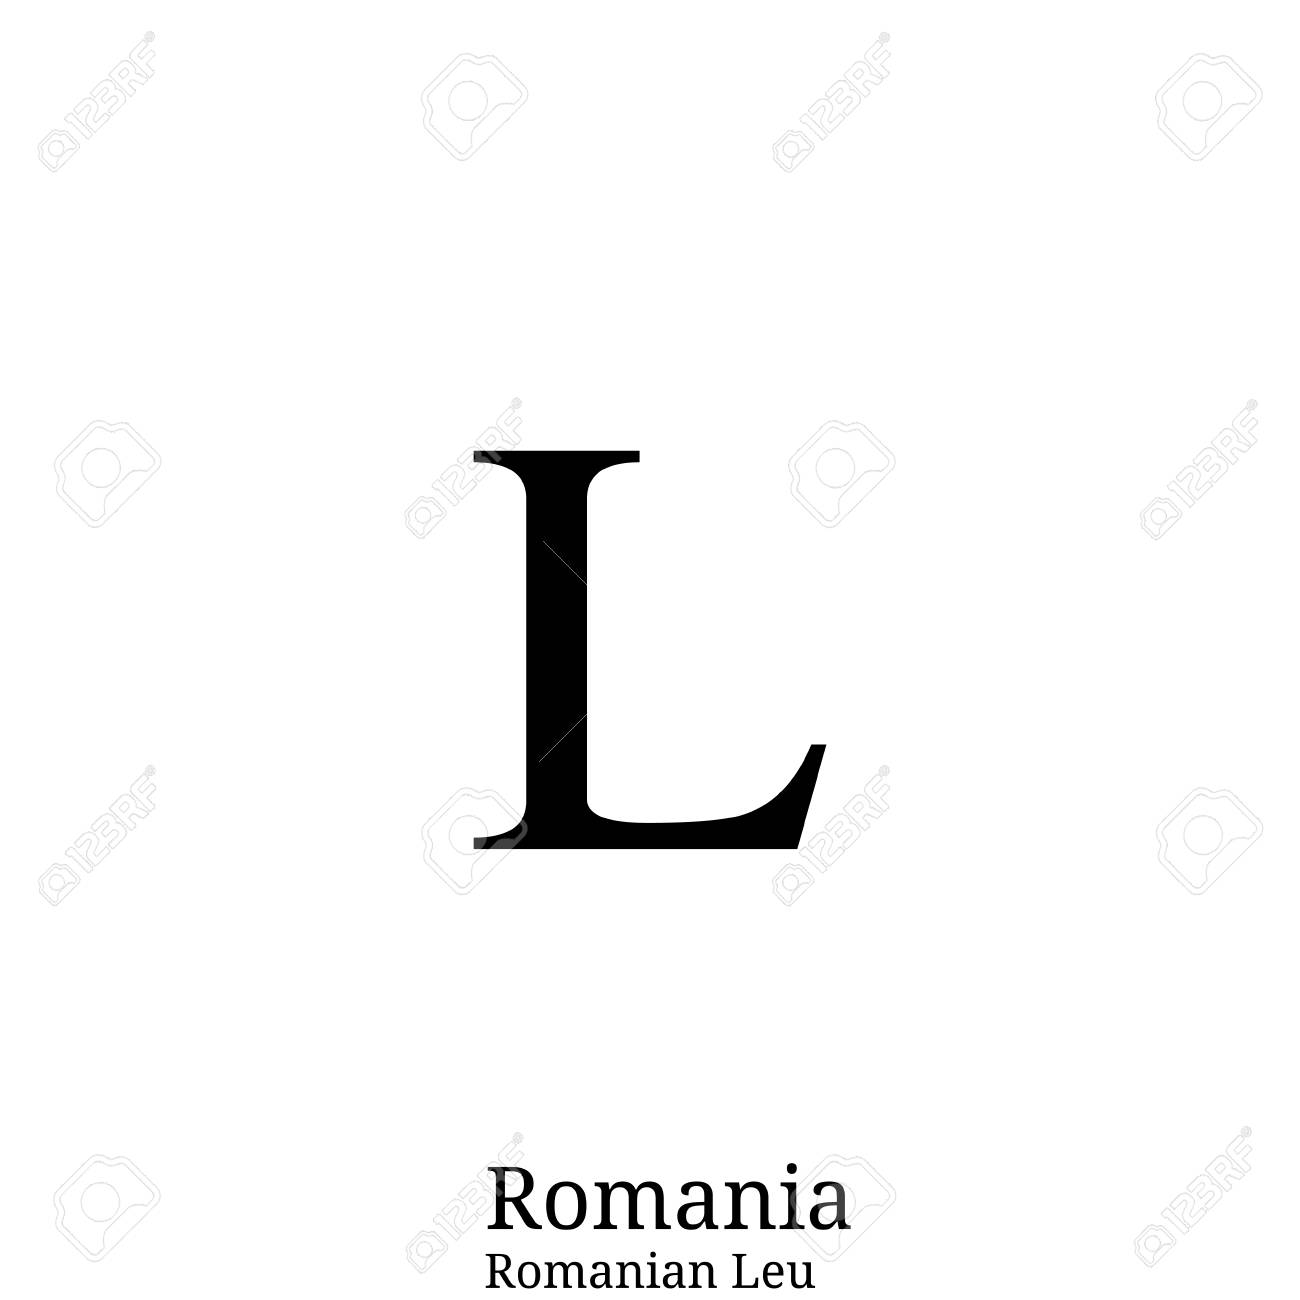 Romania 1 Leu - Foreign Currency